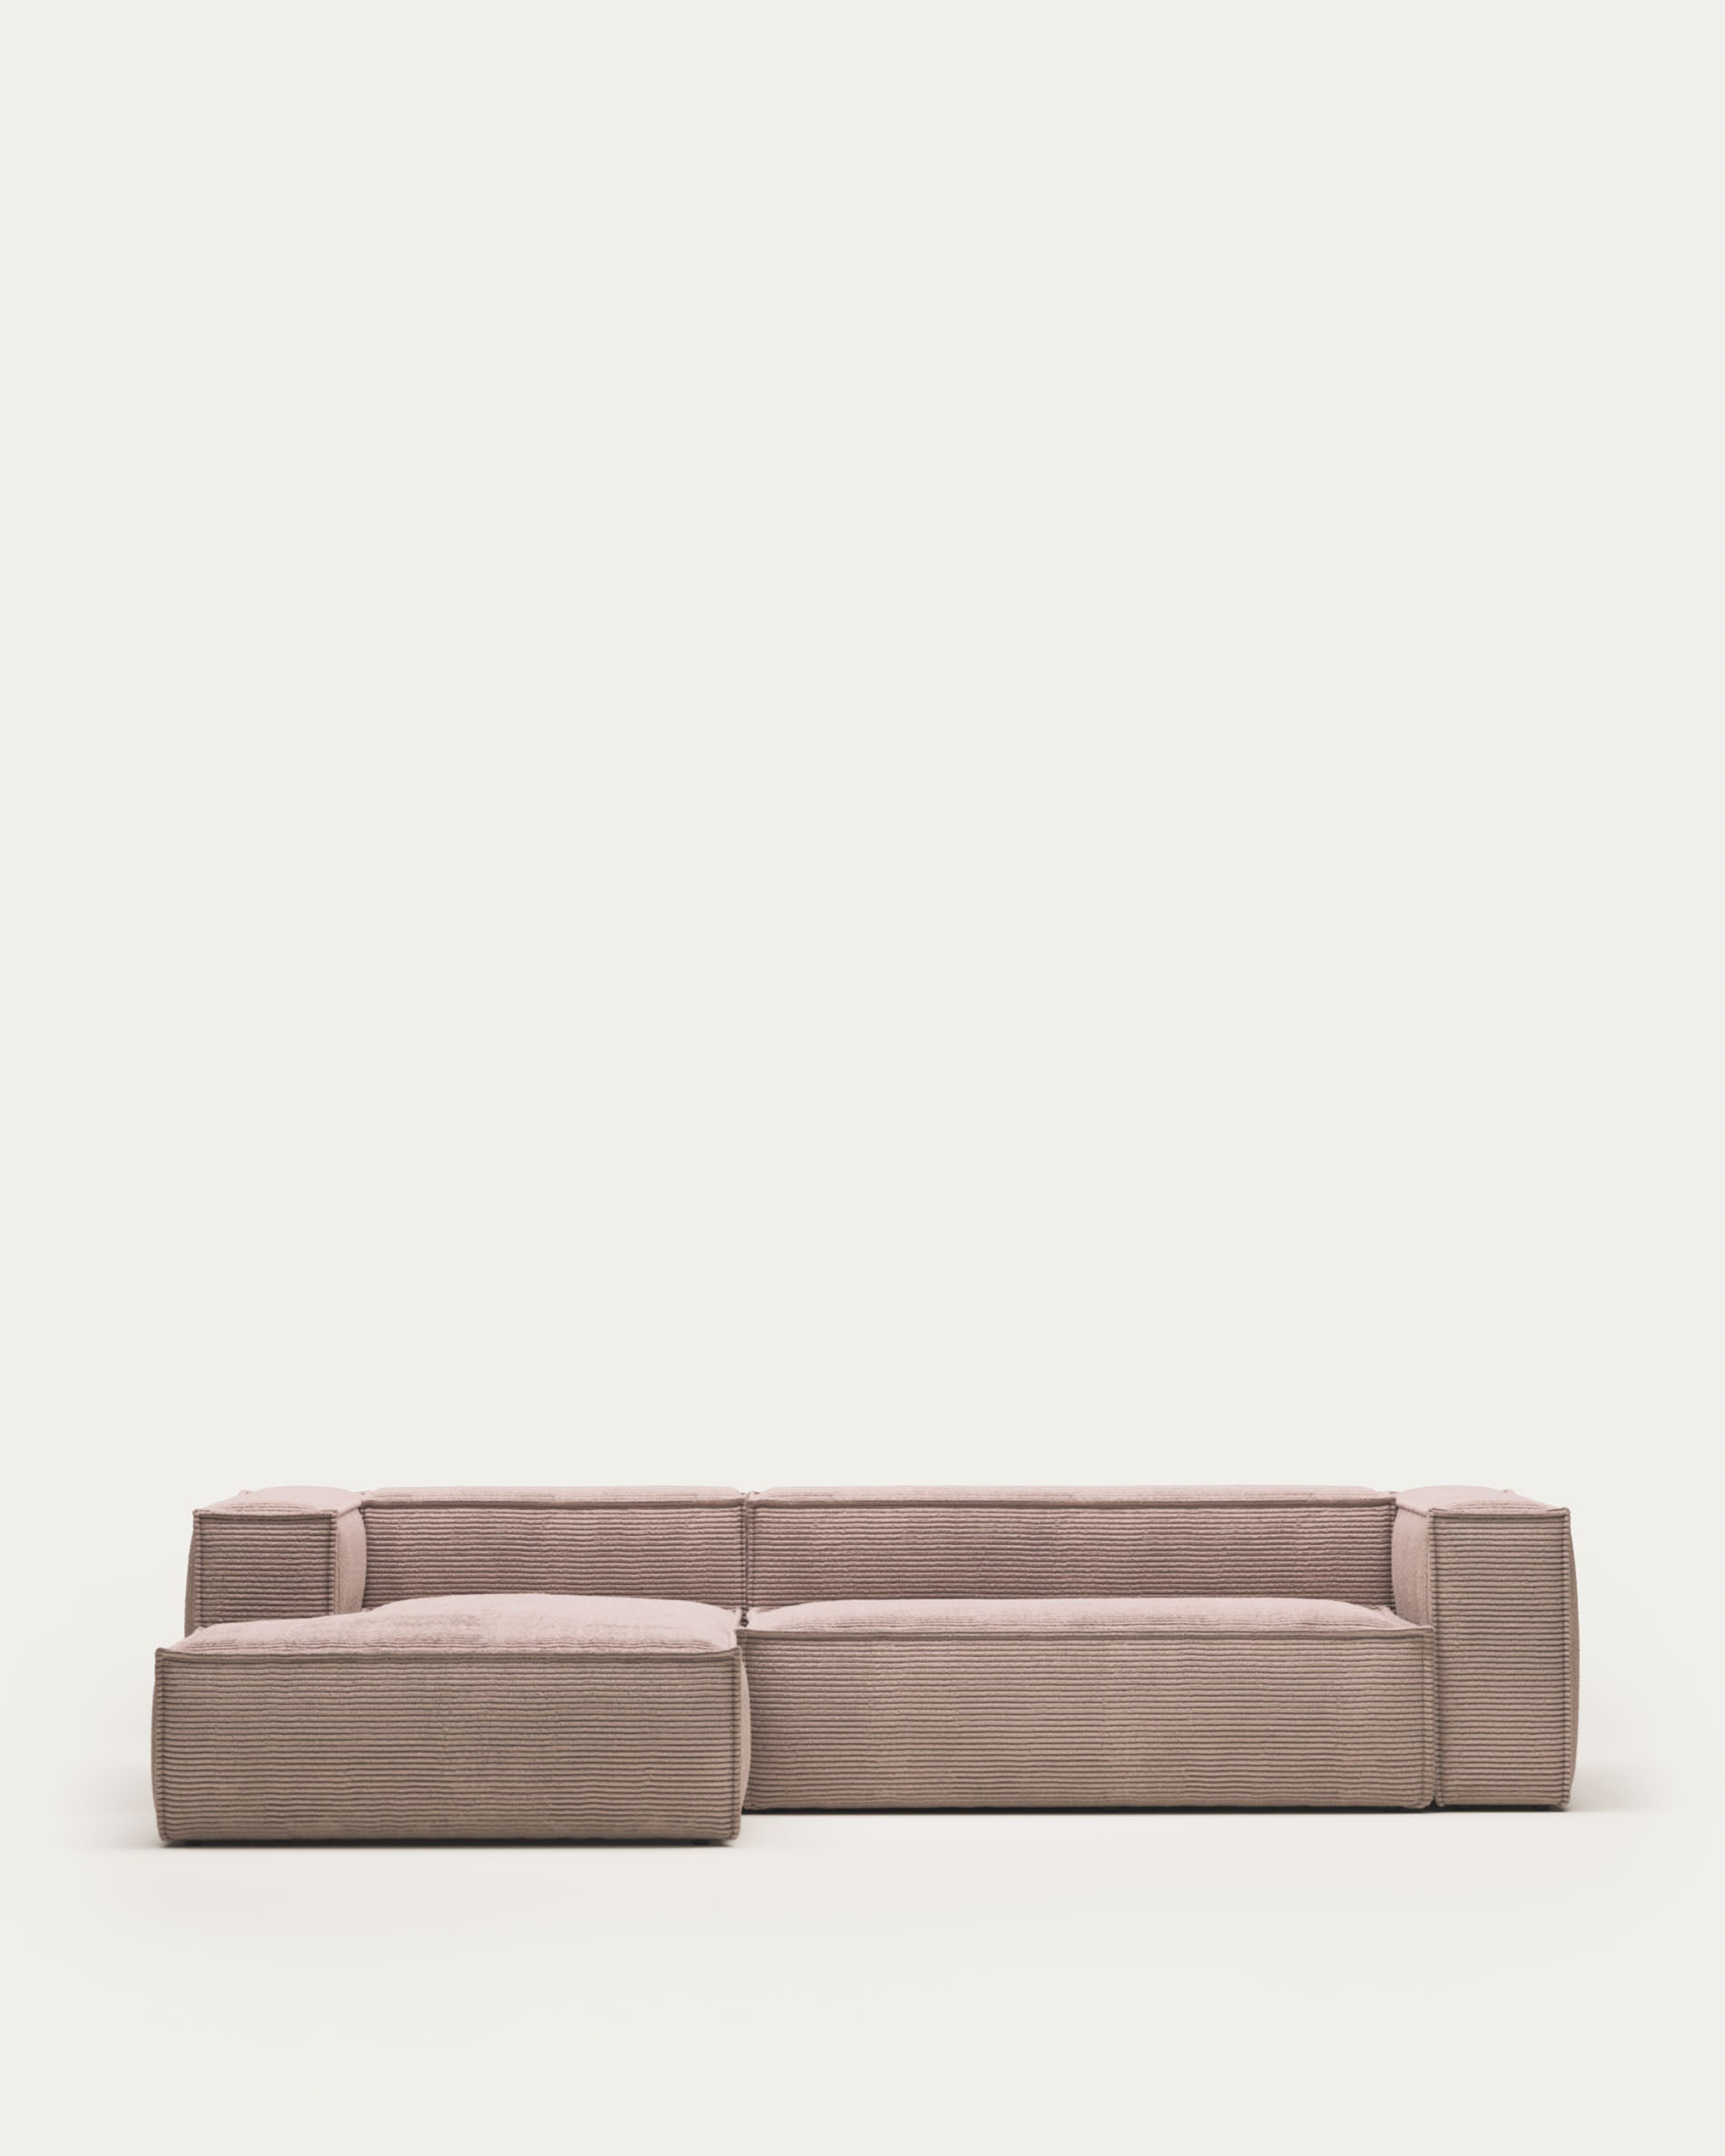 Blok 3-person sofa with chaise longue on the left in pink corduroy, 300 cm